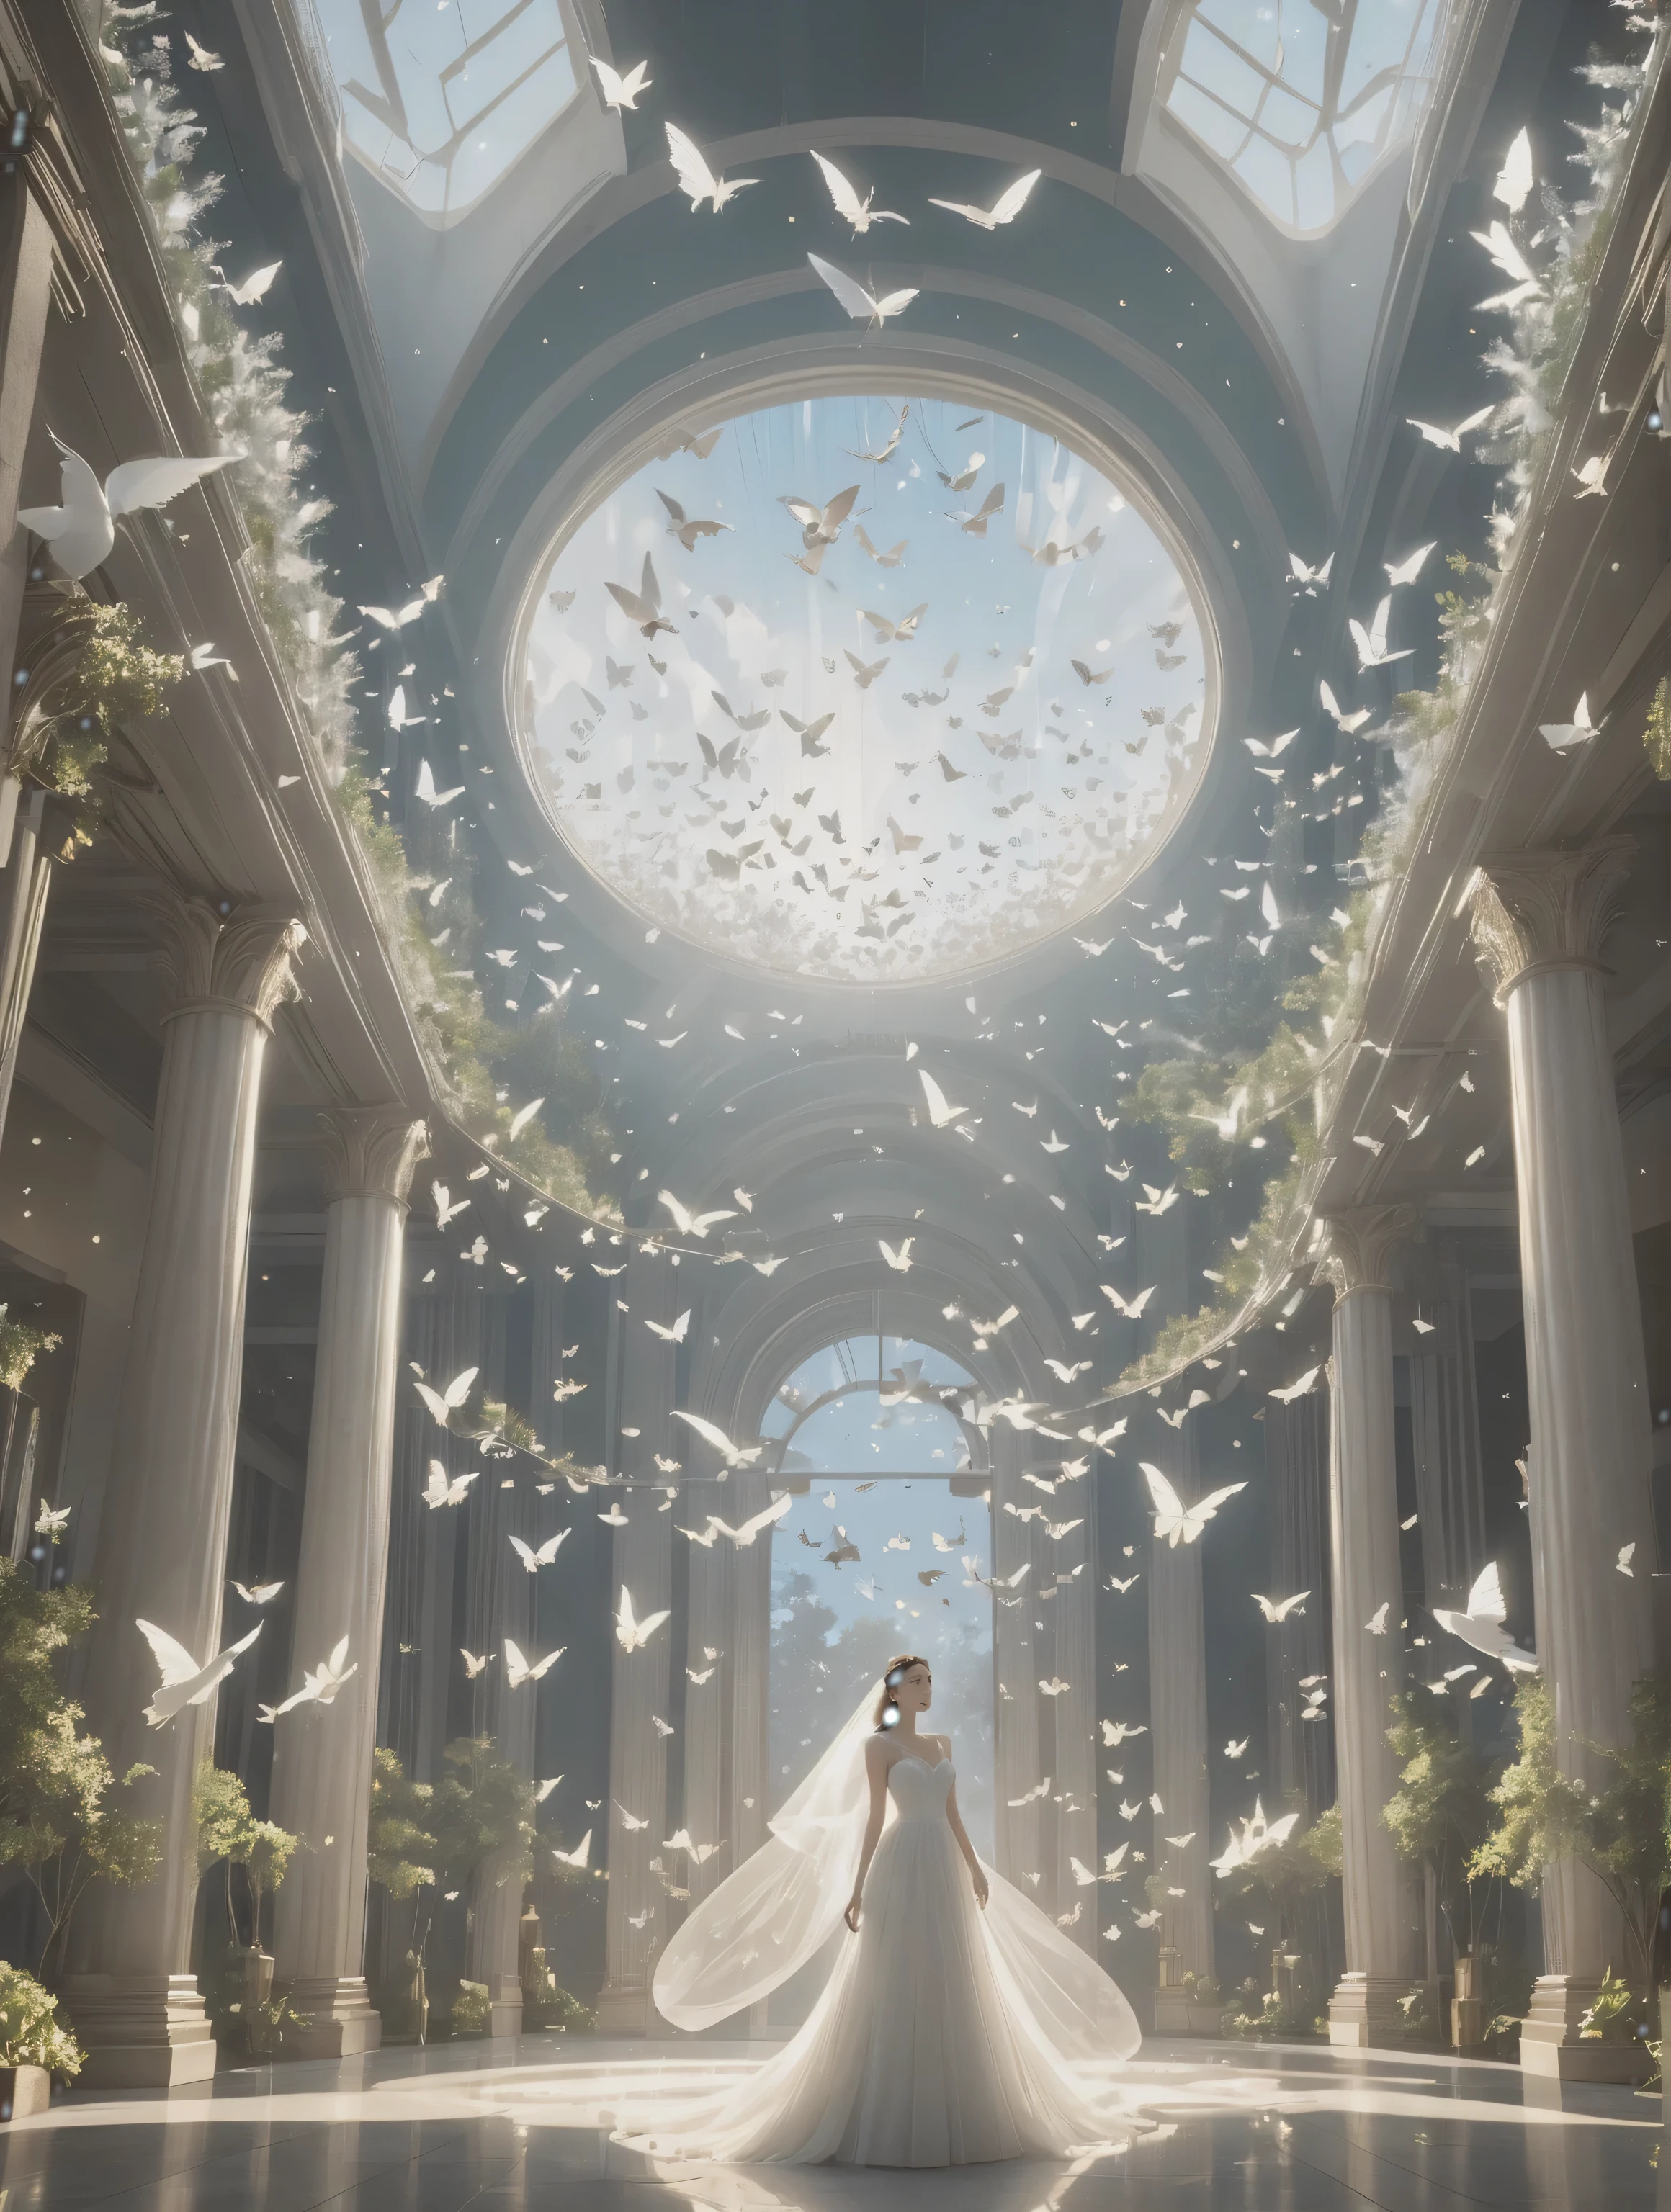 There are many white birds flying in the sky inside the building, global illumination. Visual effects, highly detailed surreal Visual effects, Butterflies flying in the sky, Volumetric light ， surreal, . movie stills, epic Volumetric lighting, Volumetric light from above, Dramatic dream lighting, Obras de arte intrincadas. octane rendering, ethereal Volumetric light, Volumetric lighting. fantasy，Mixed forest，wedding inspiration，bride